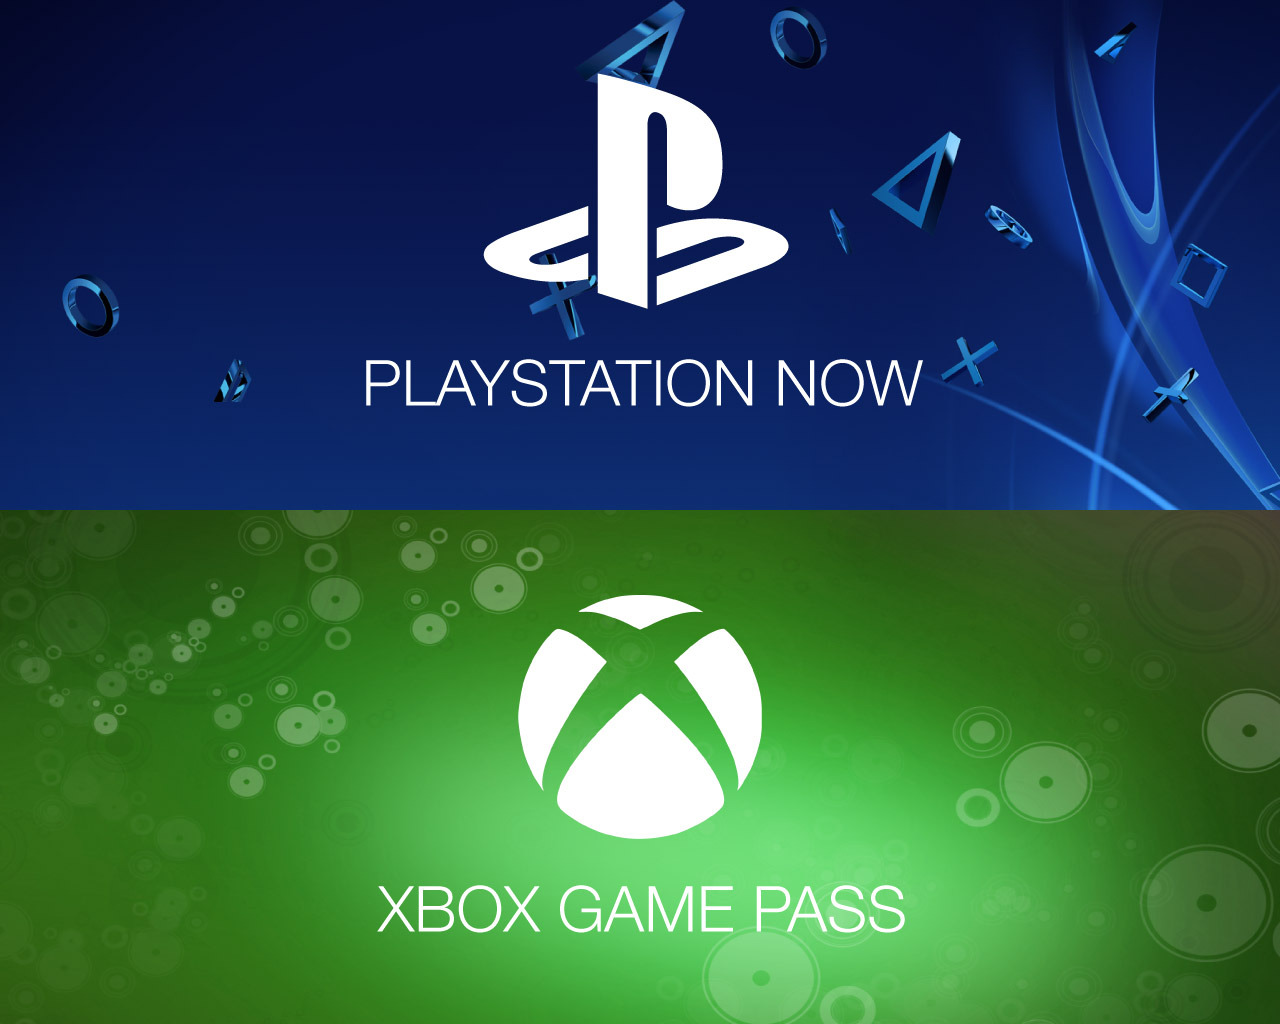 PS5 is getting Game Pass! (PlayStation Game Pass for PS5) 